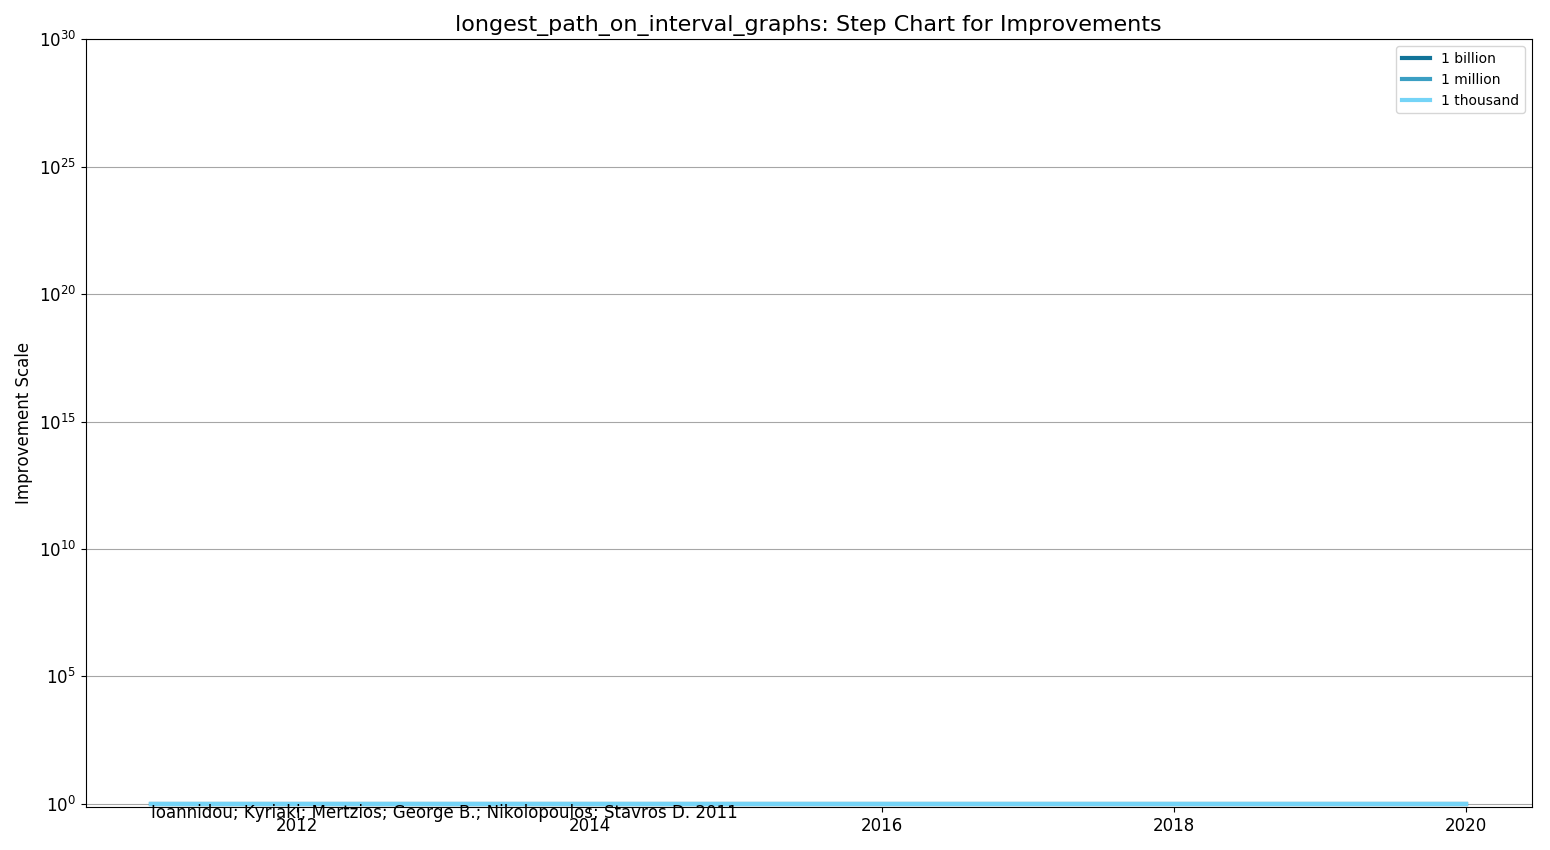 File:Longest path on interval graphsStepChart.png